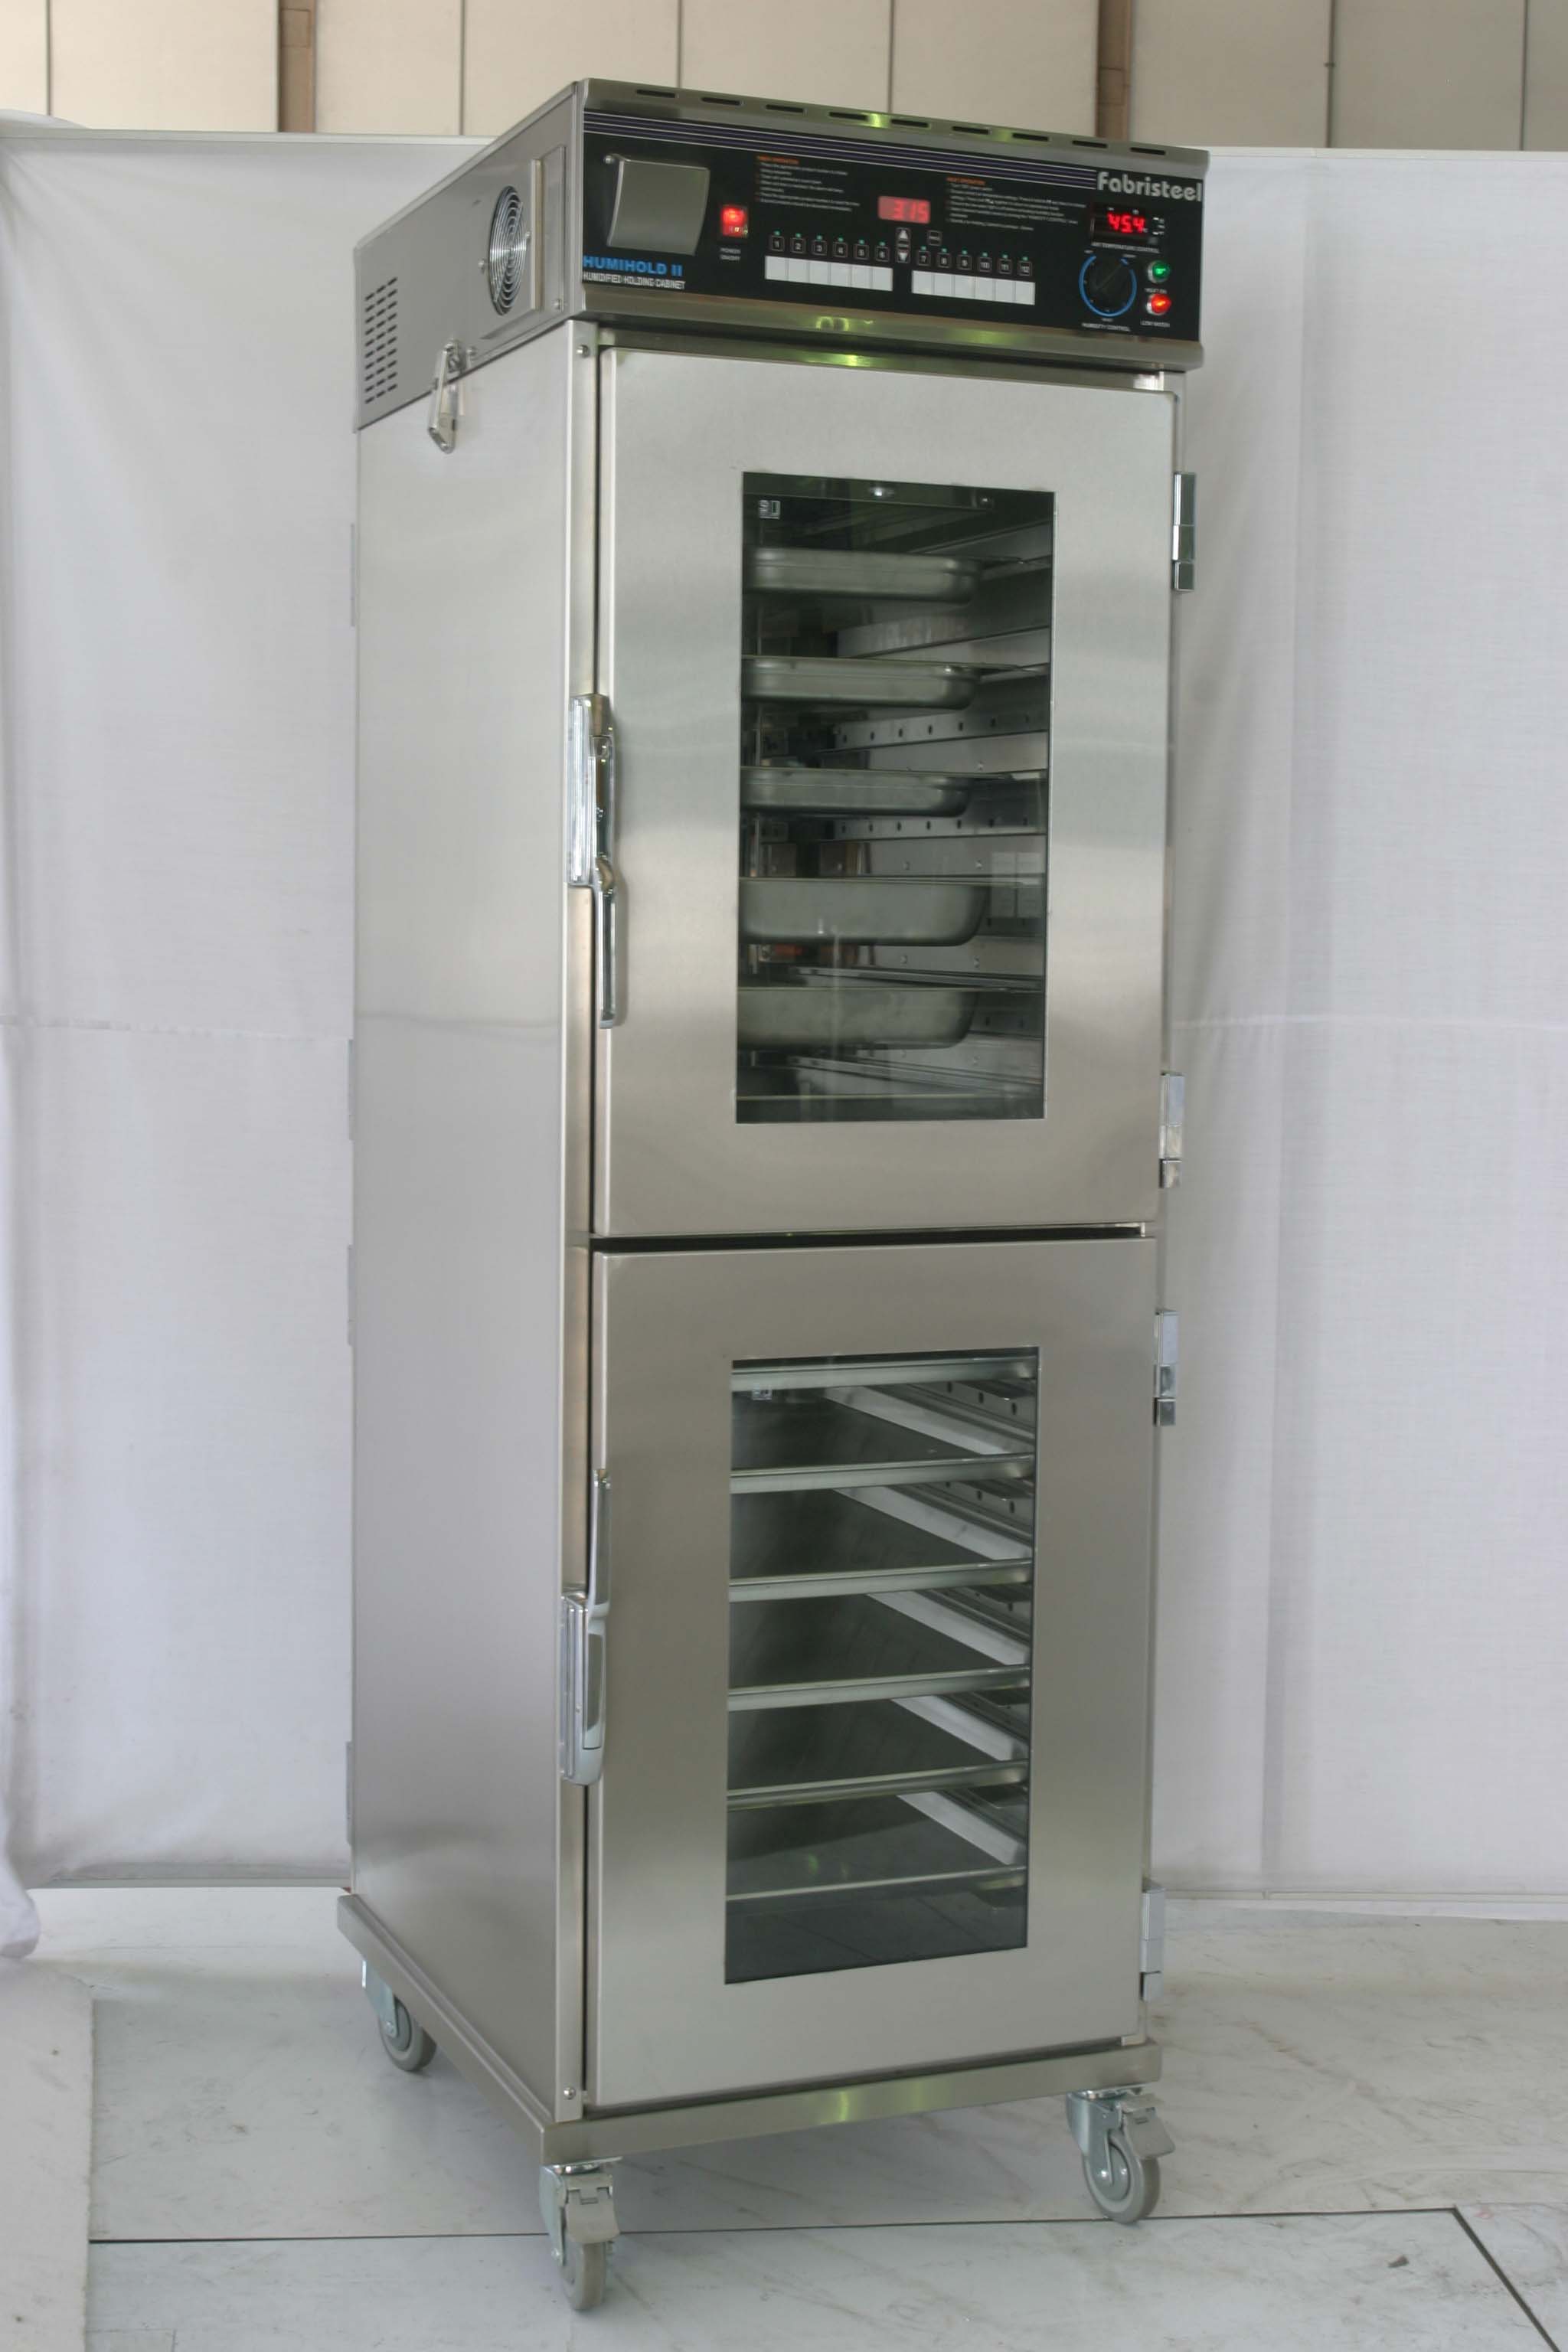 Heated Holding Cabinet